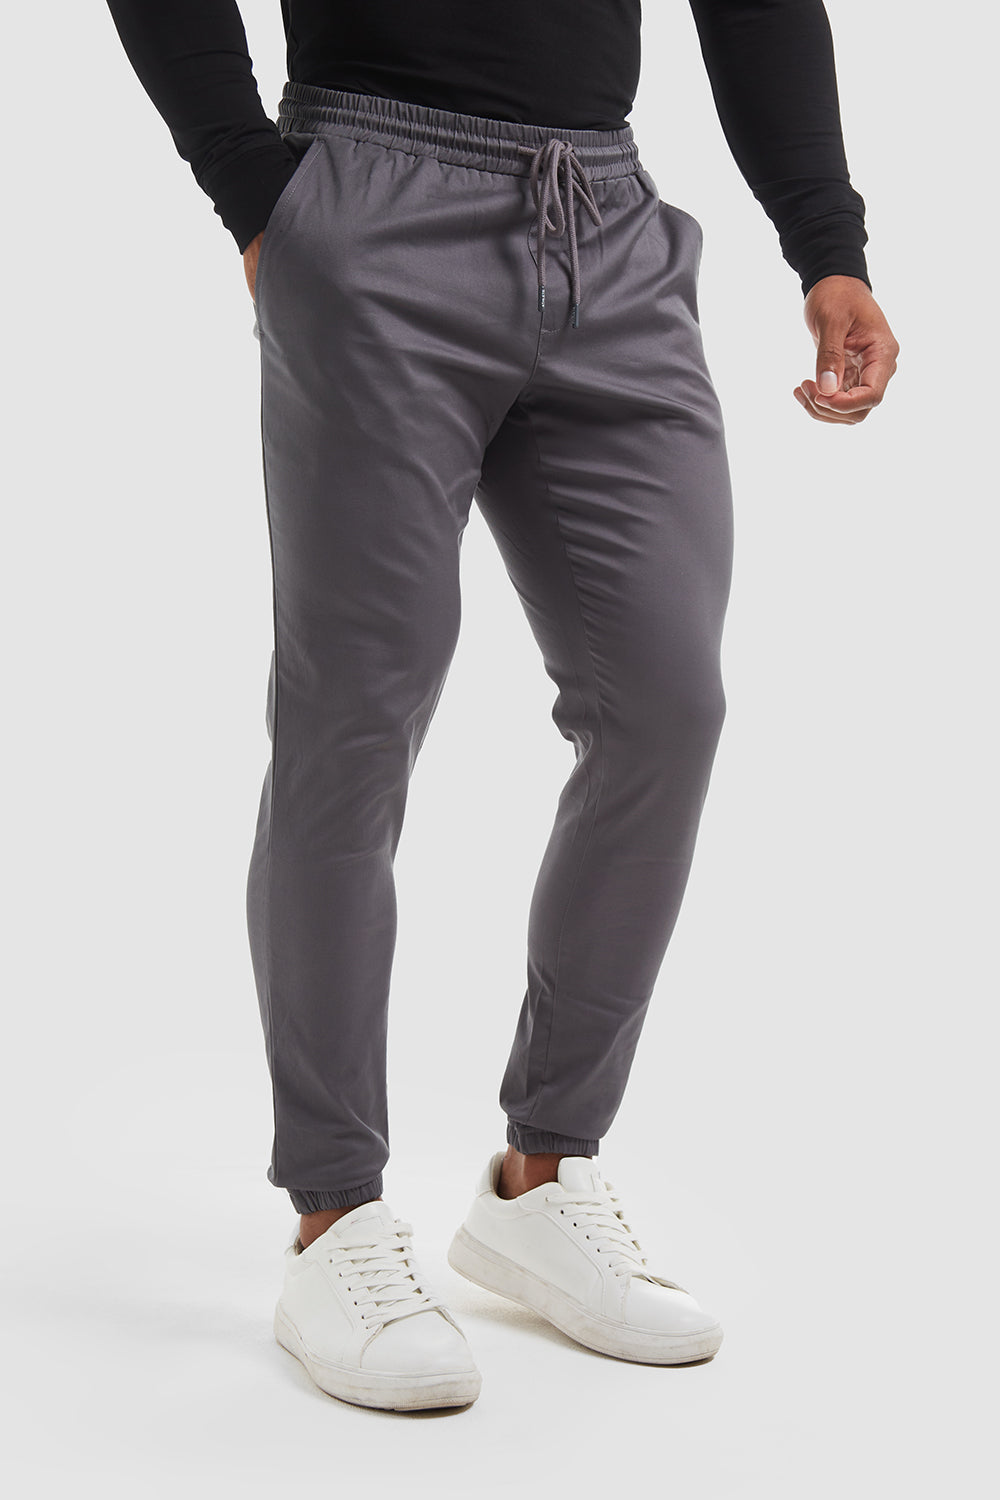 Cuffed Trousers in Graphite - TAILORED ATHLETE - ROW